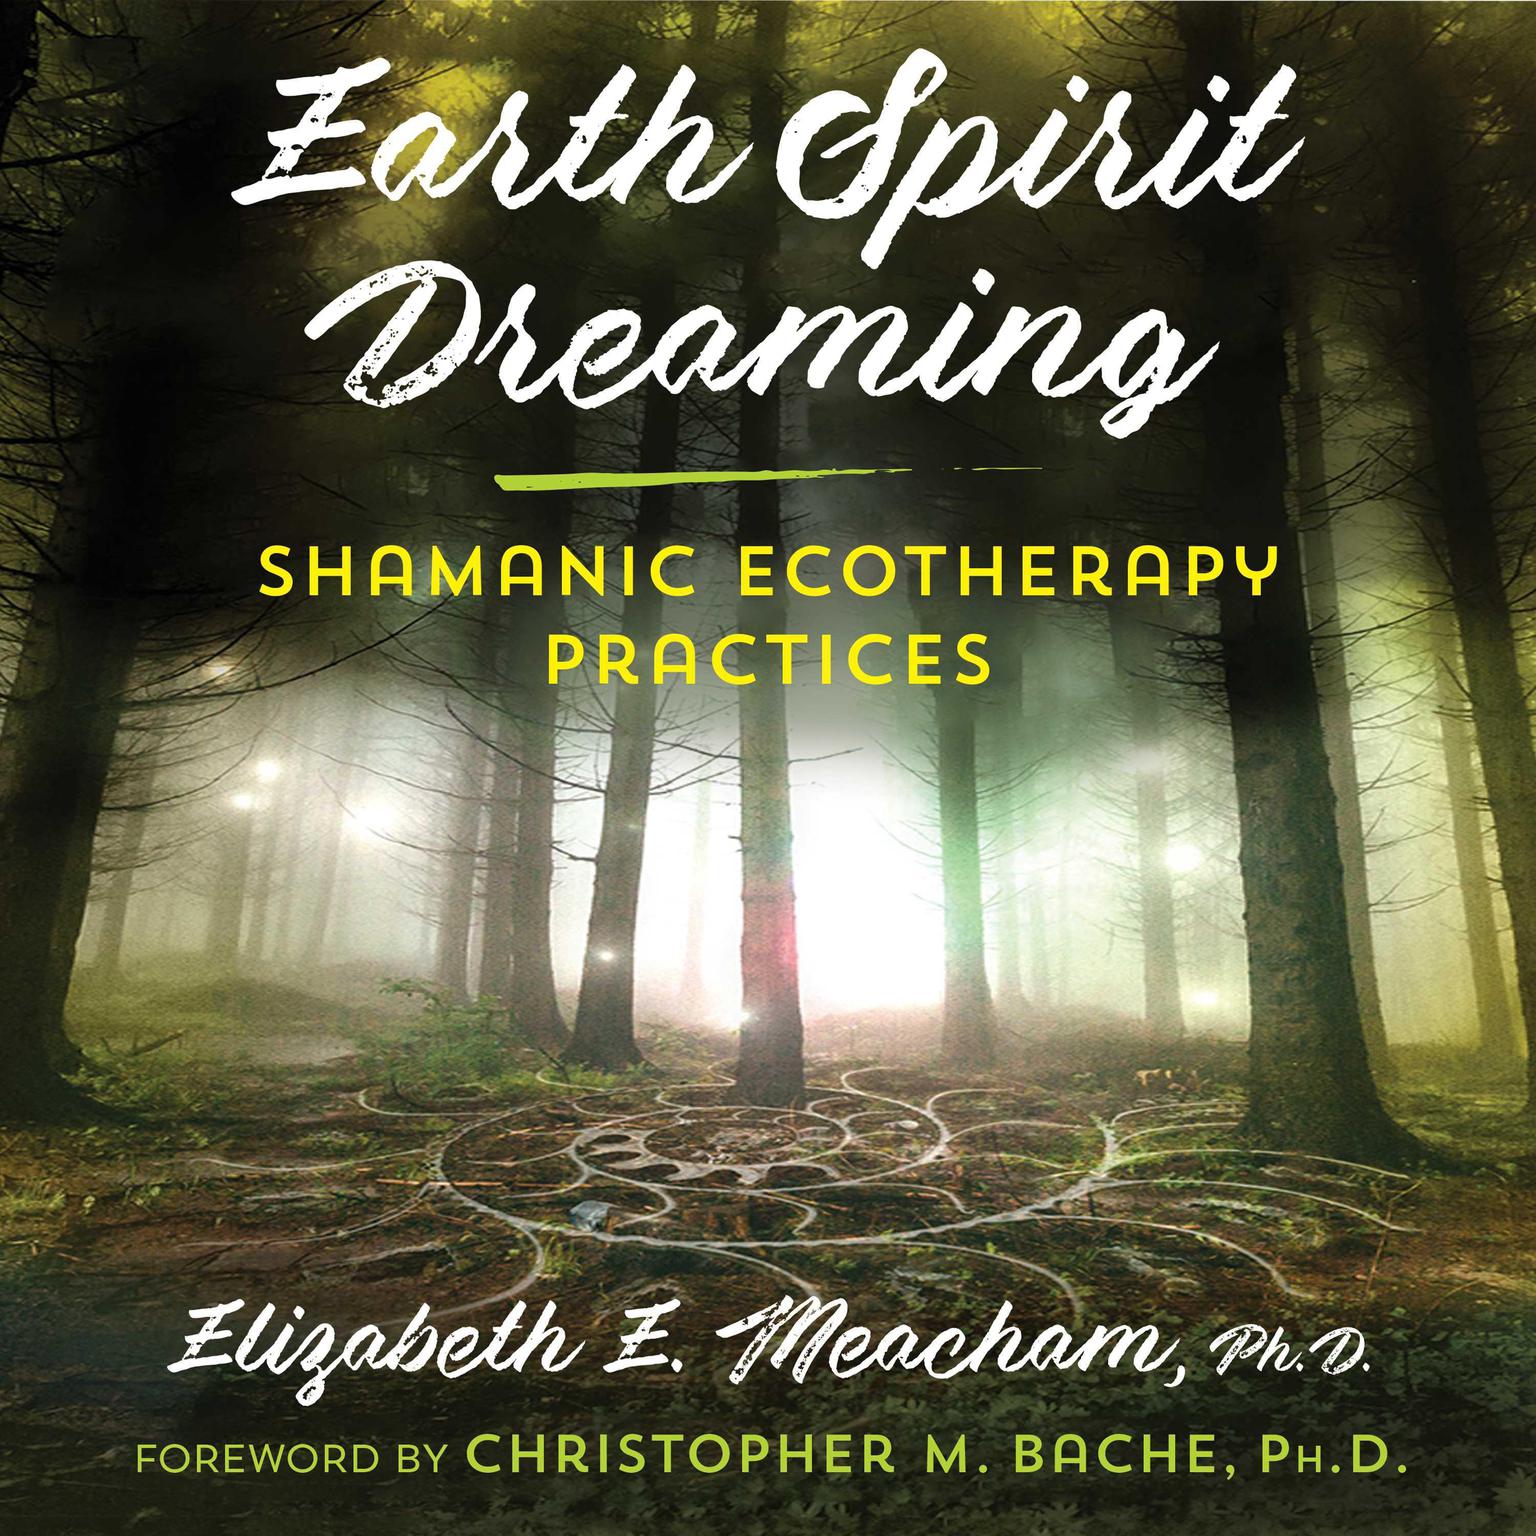 Earth Spirit Dreaming: Shamanic Ecotherapy Practices Audiobook, by Elizabeth E. Meacham